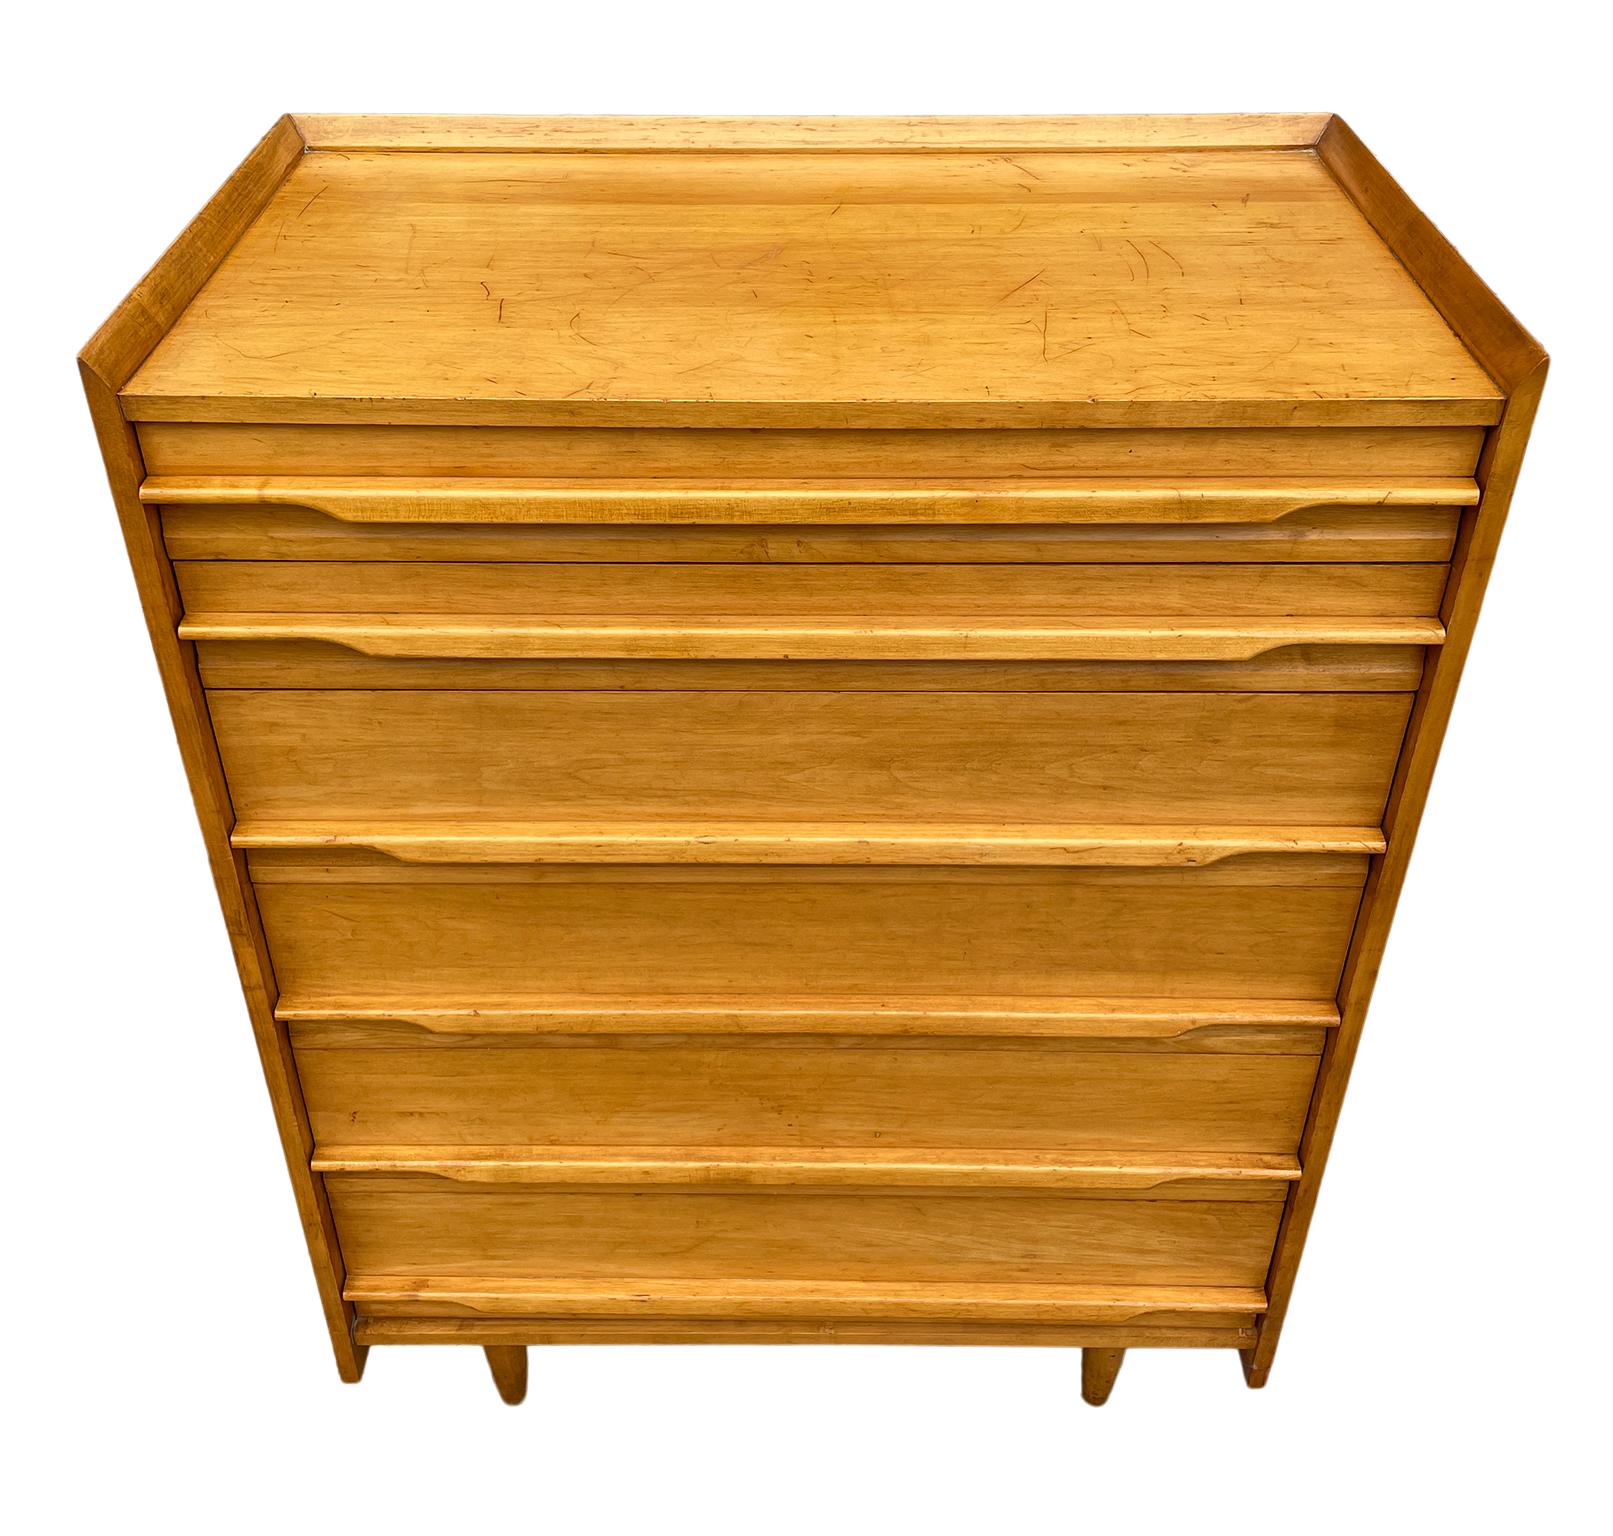 Unique Mid-Century Modern American solid maple tall 6 drawer dresser by Crawford. All solid maple construction with carved handles and sits on 4 tapered legs. Vintage original condition. Shows wear on top surface drawers clean inside. Metal tag